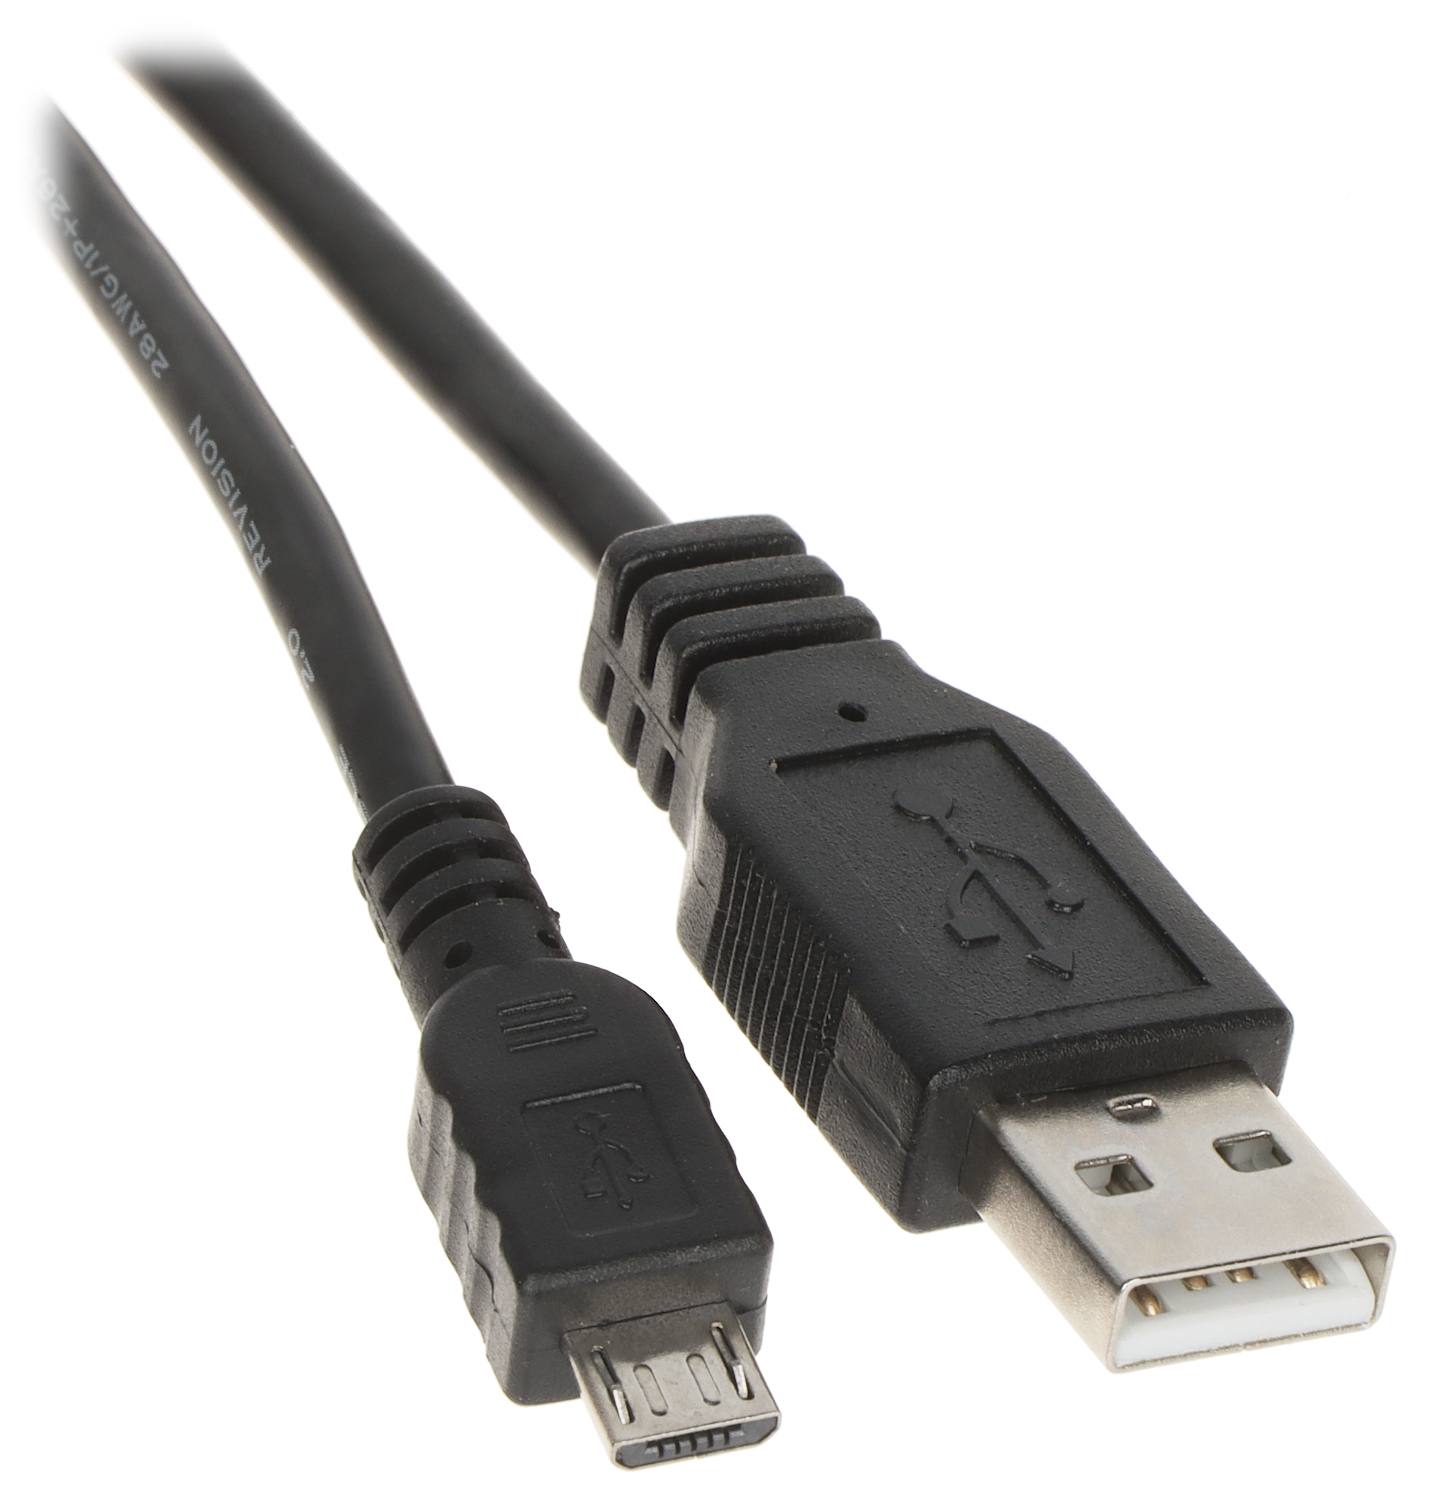 Cable usb 2.0 a micro usb – 1.5 m